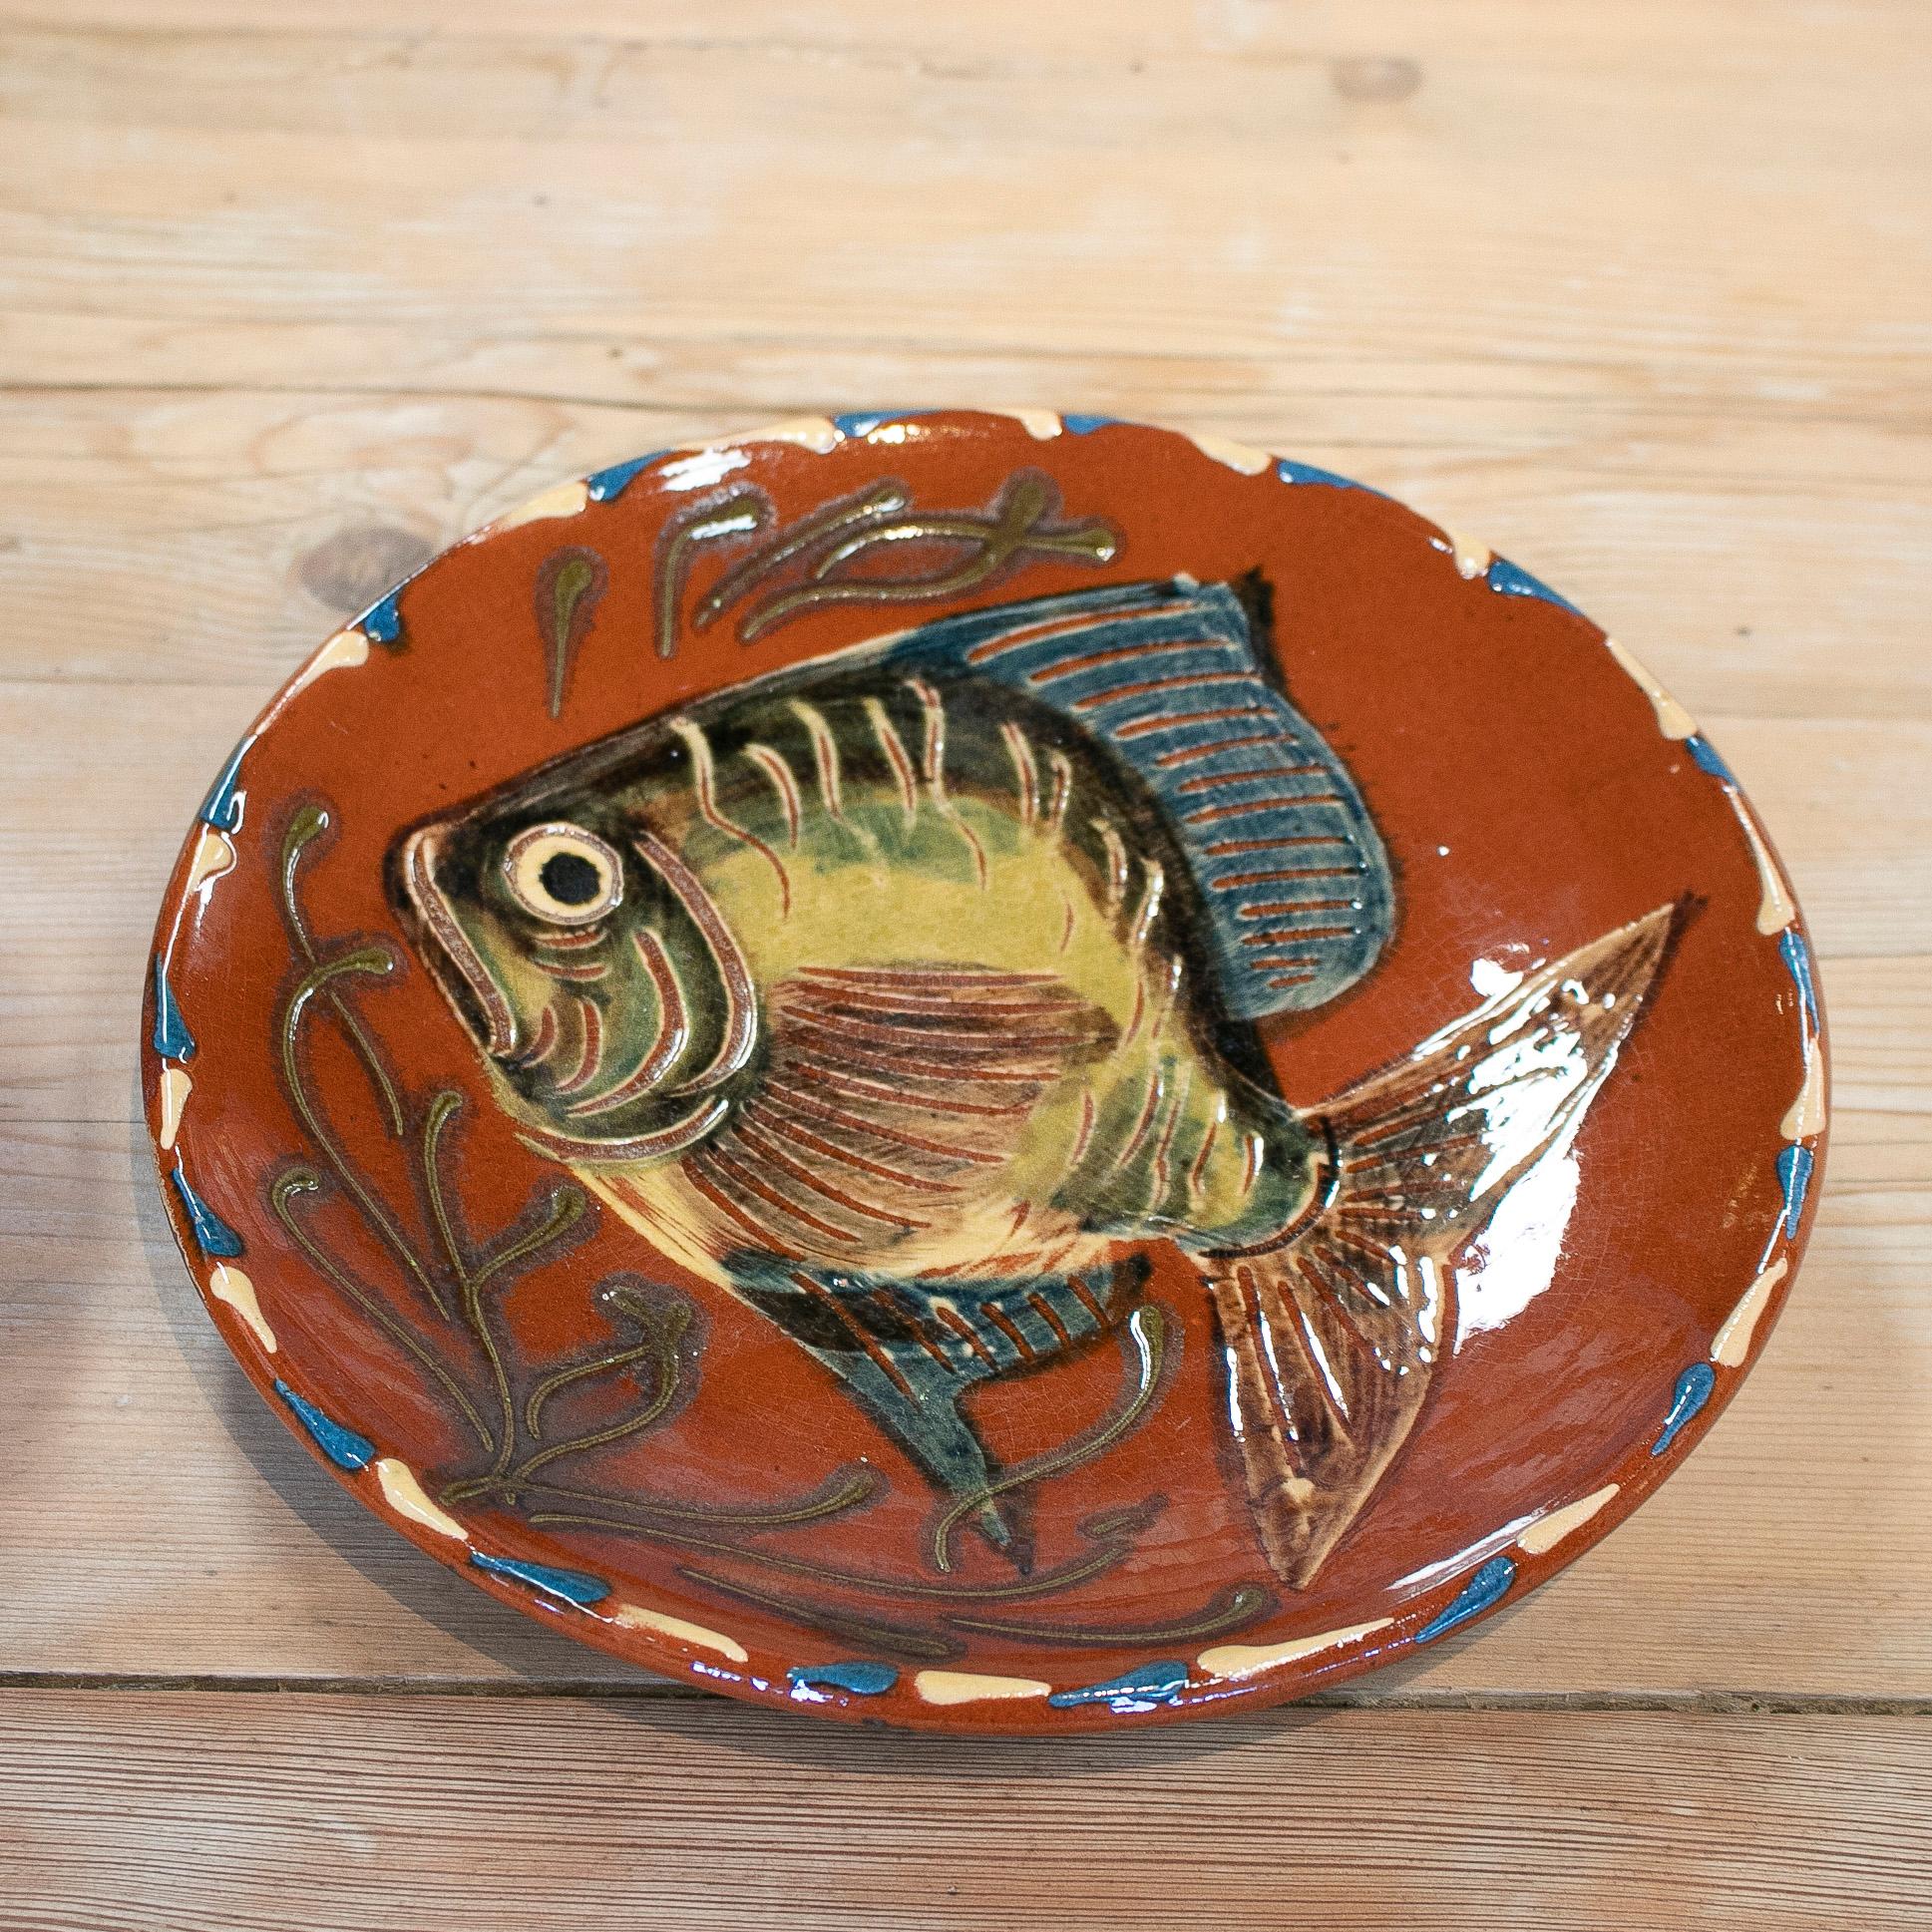 Vintage pair of 1970s Spanish ceramic plates with hand painted fish.